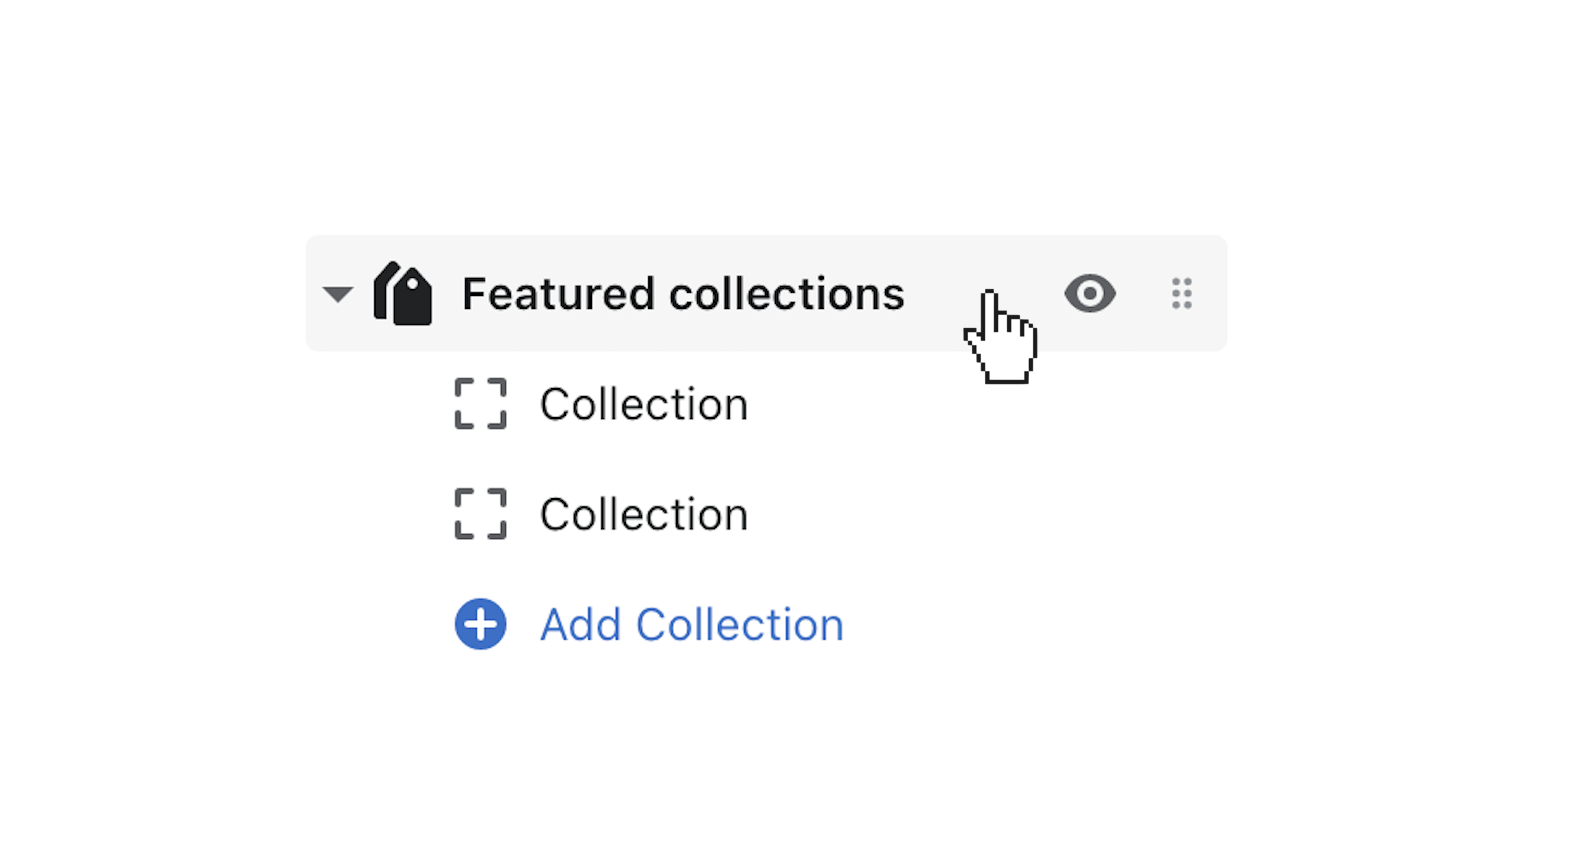 click_the_featured_collections_section_to_customize_its_general_settings.png